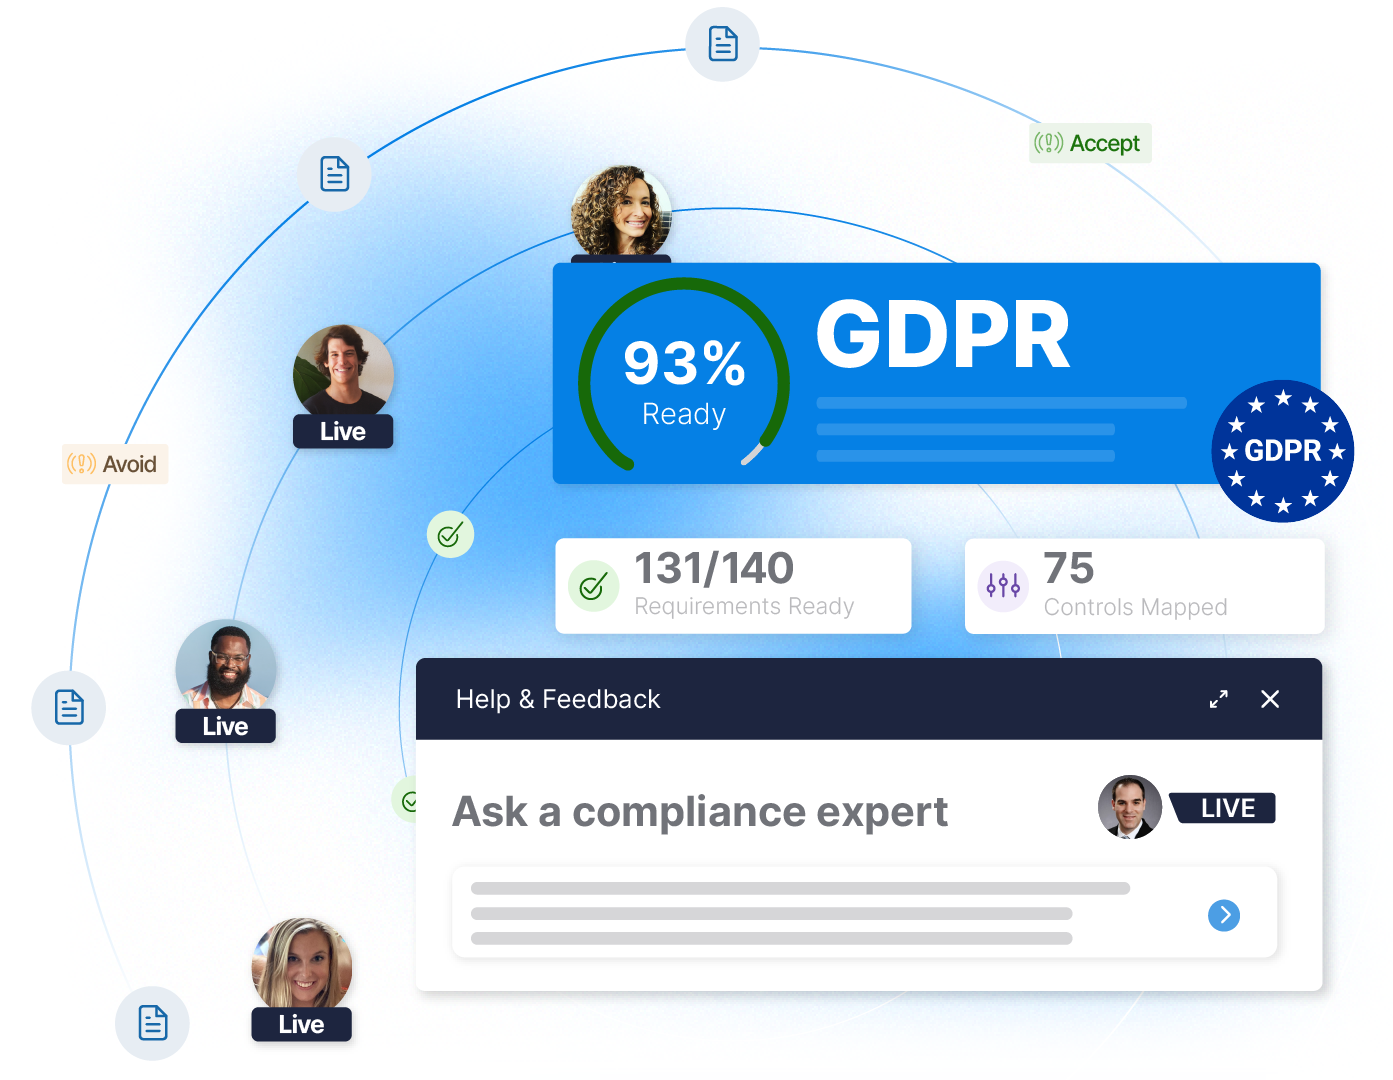 GDPR - Partner With Experts to Reduce GDPR Complexity Image